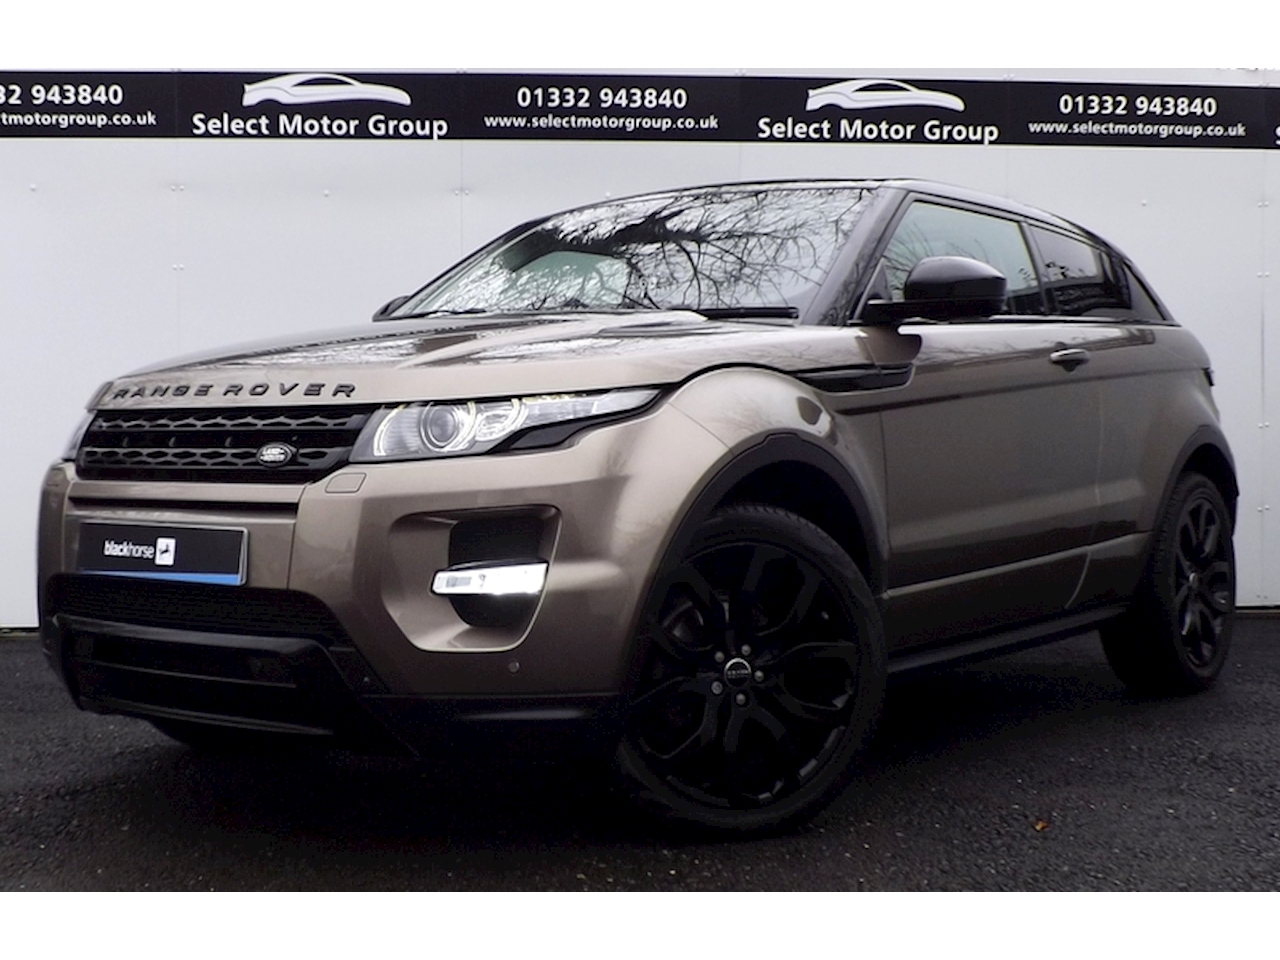 Range Rover Evoque 2.2 SD4 Dynamic LUX 3dr Coupe Automatic Diesel